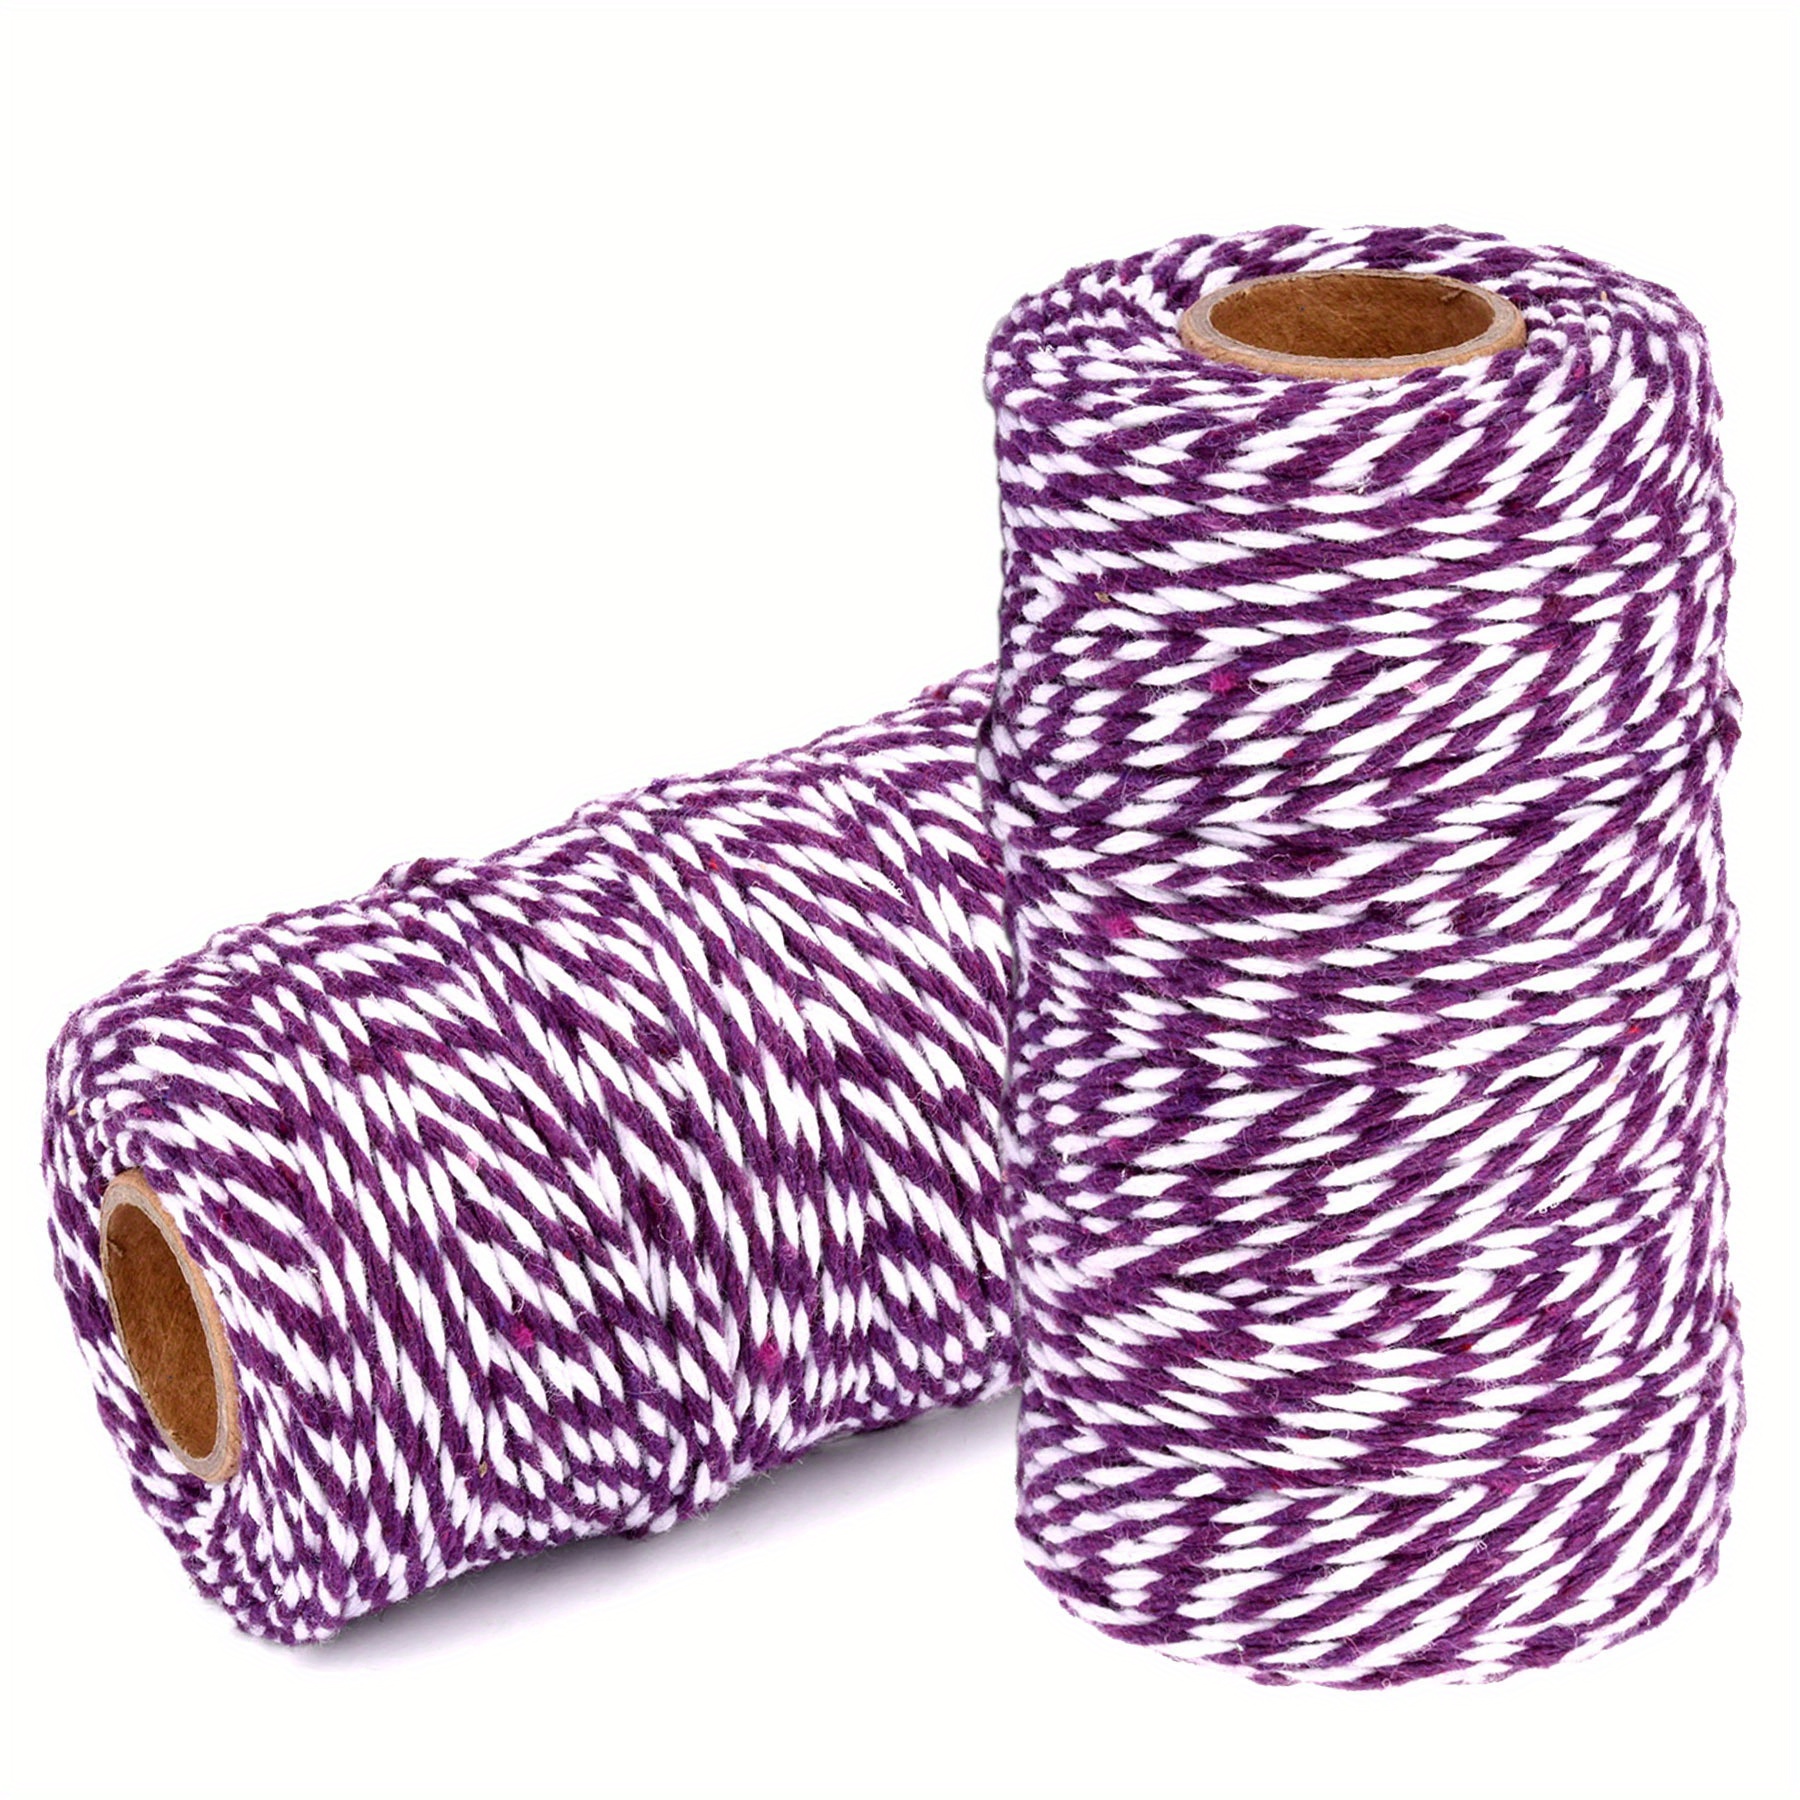 Colored rope for gift wrapping purple and white